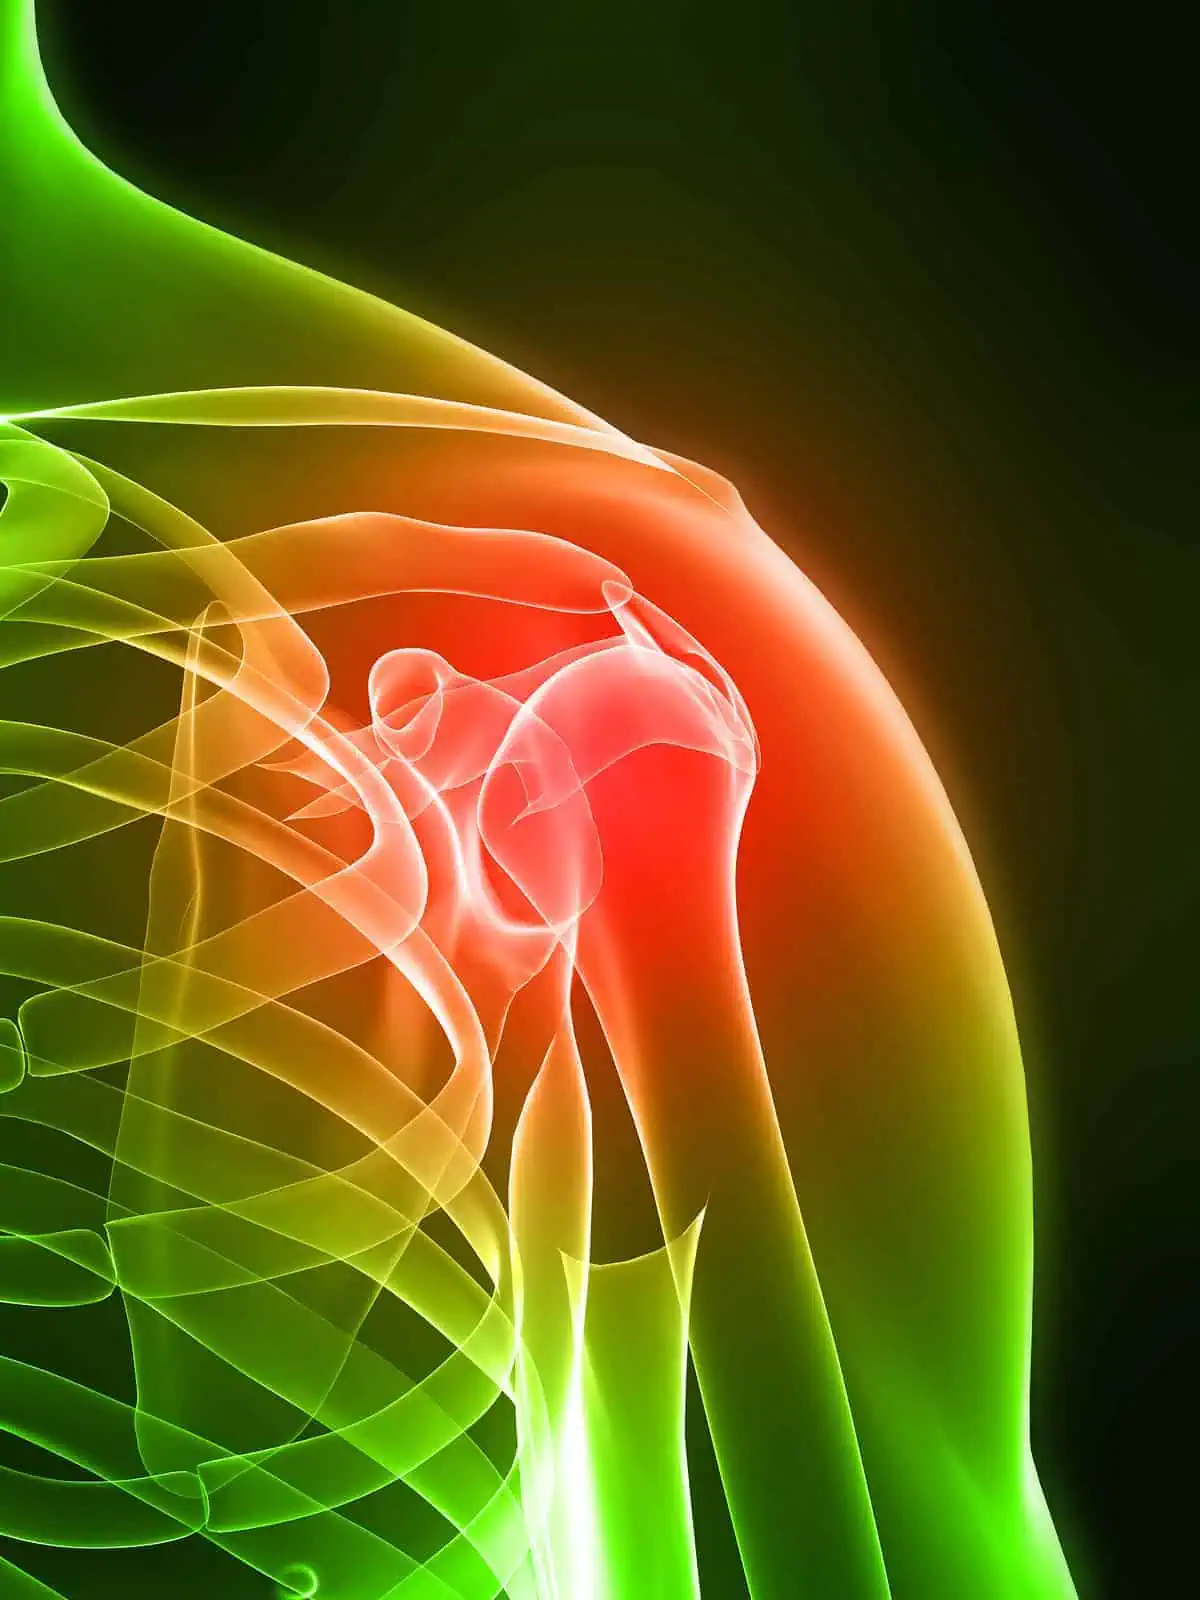 X-ray view of a red inflamed shoulder joint